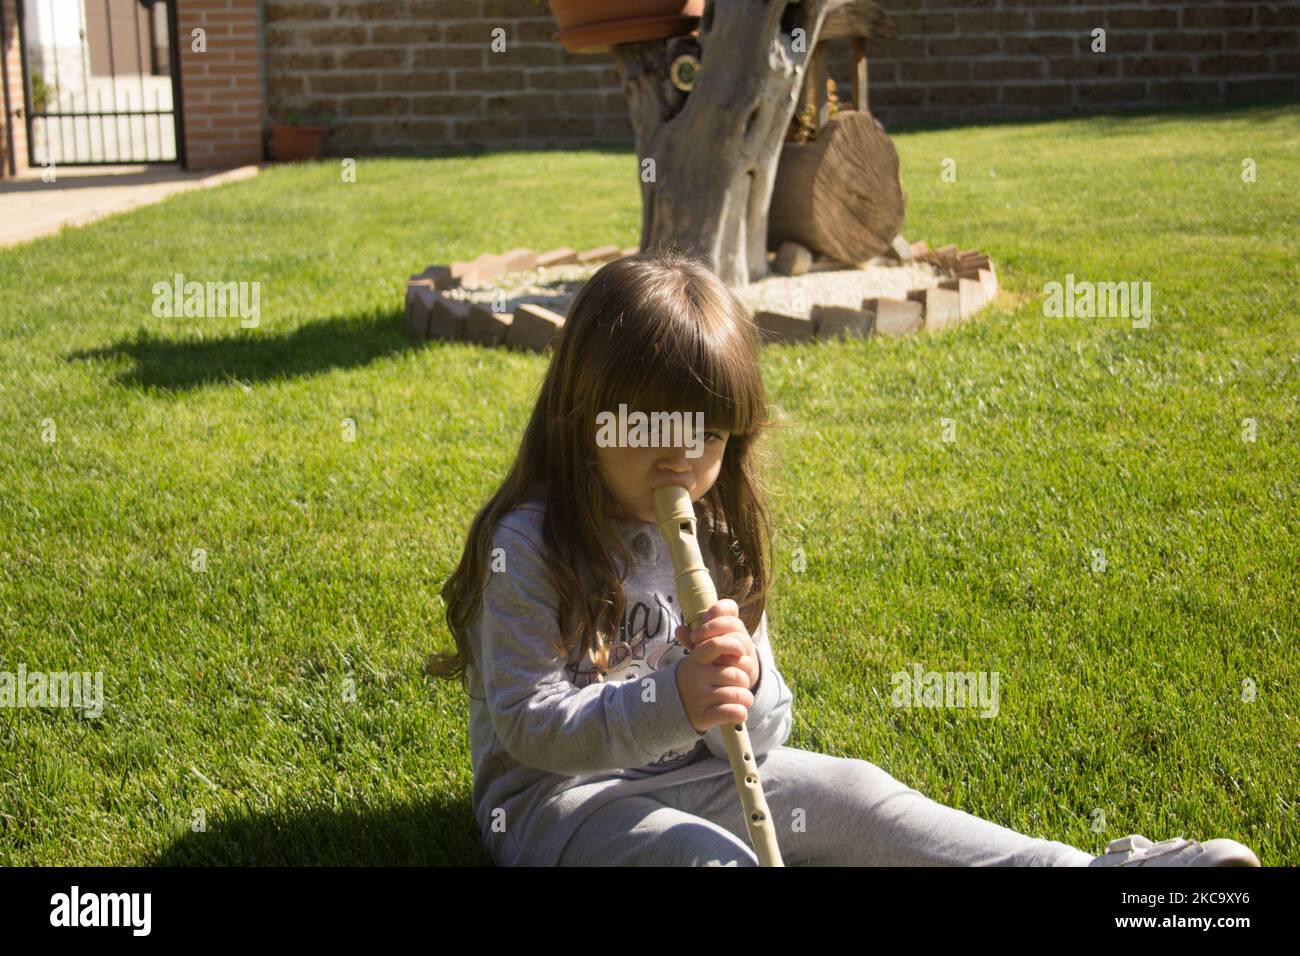 Image of an adorable little brunette girl sitting on a green grass while learning to play the flute. Stock Photo